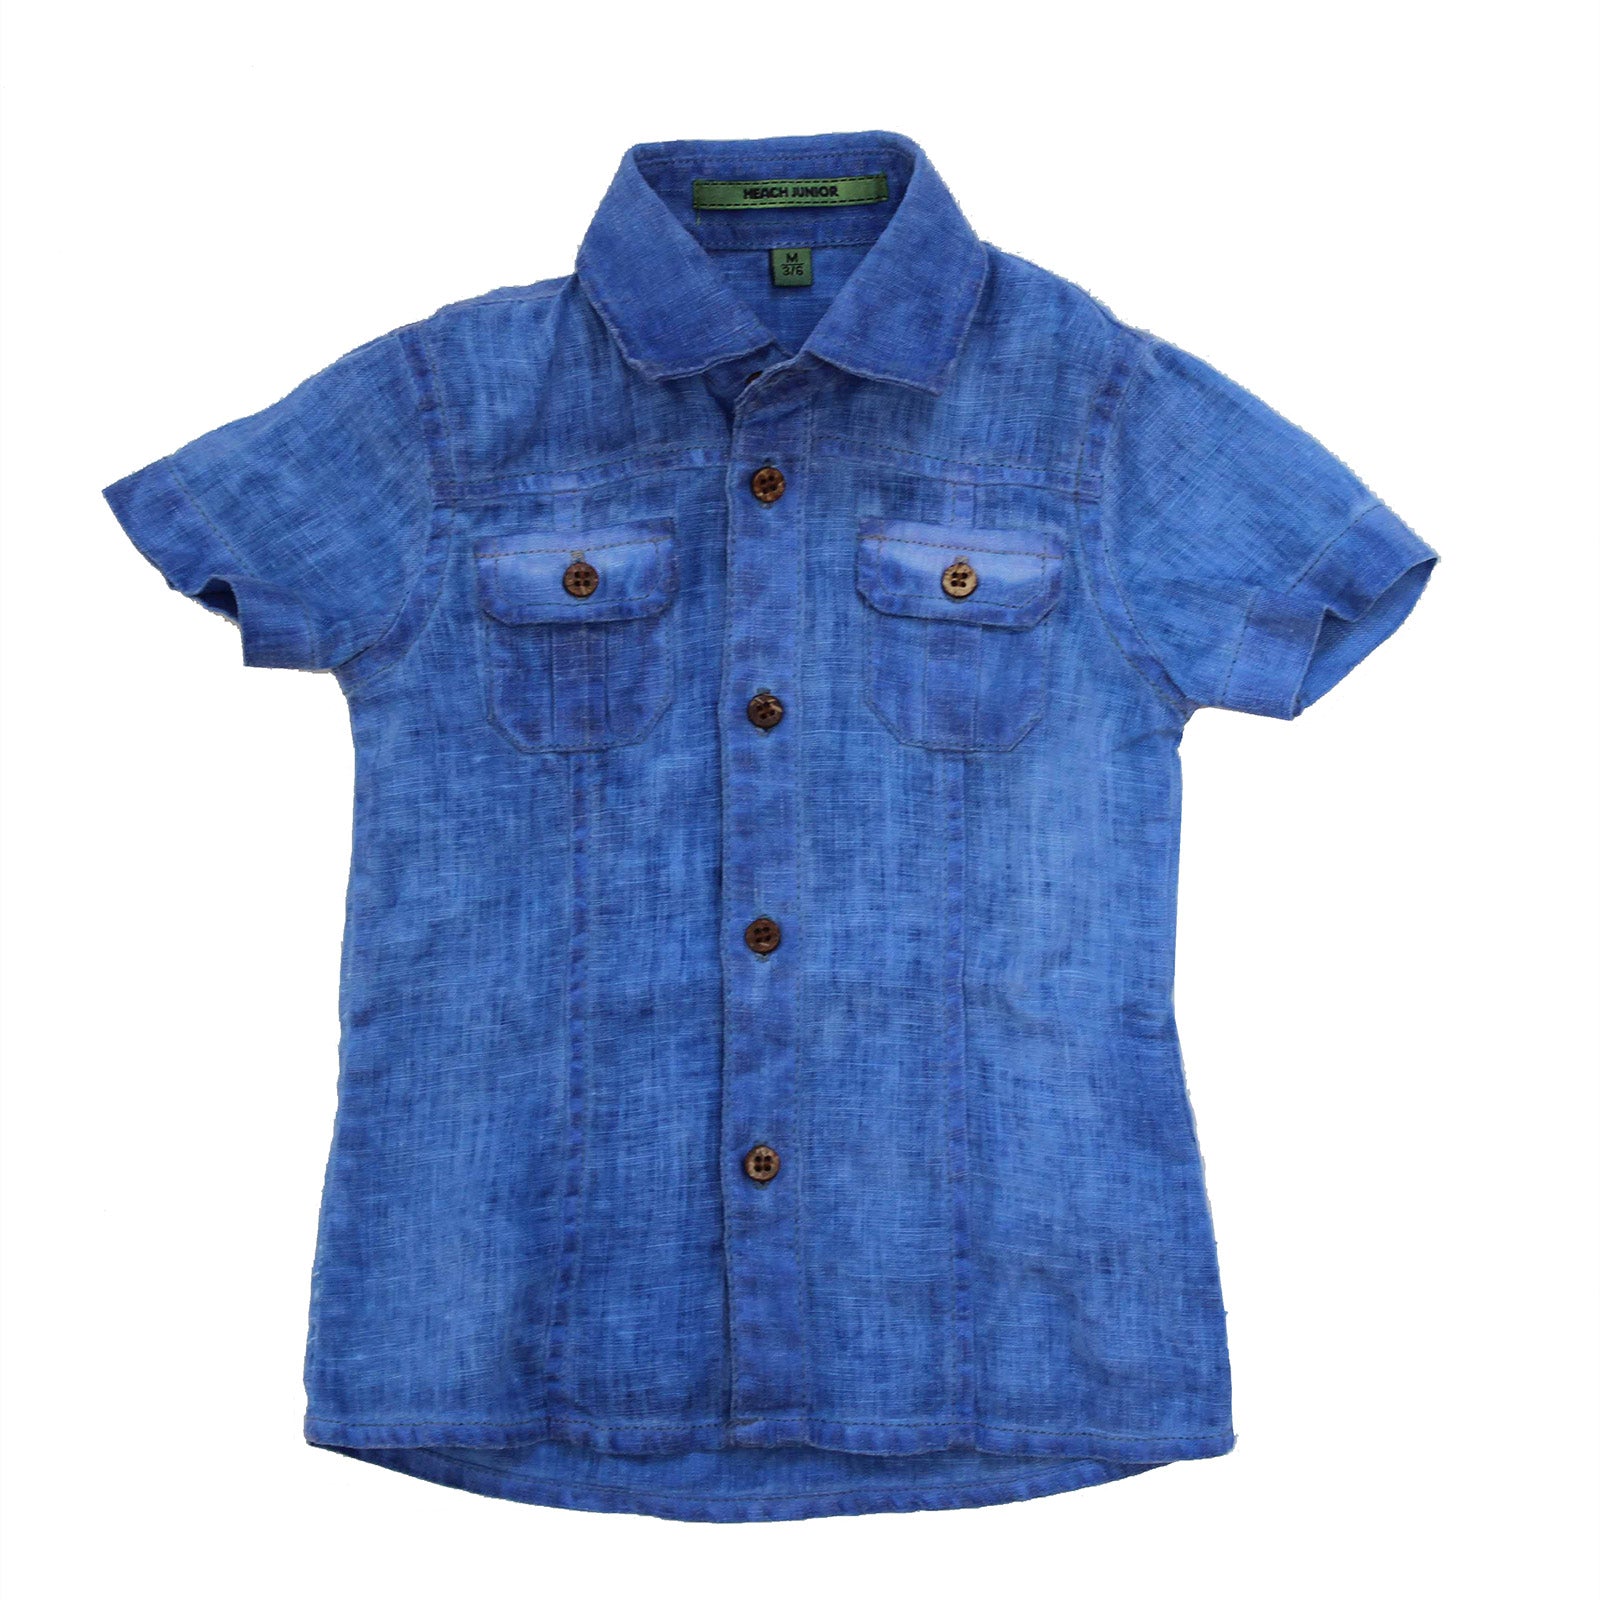 
  Short-sleeved shirt from the Silvian Heach children's clothing line in washed effect linen wit...